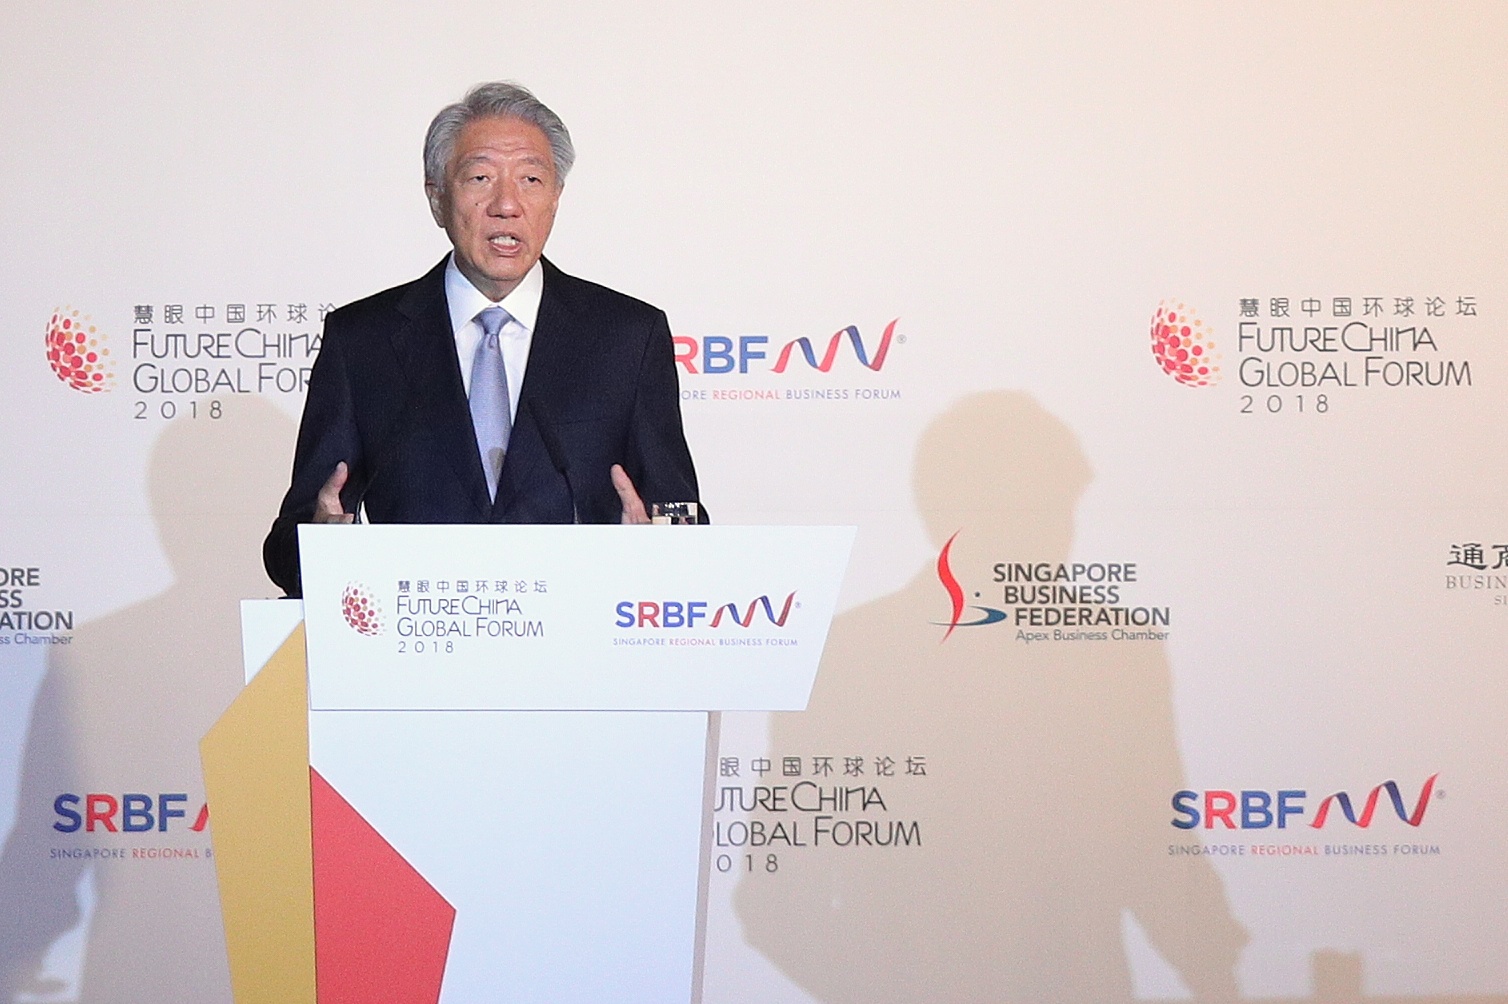 DPM Teo Chee Hean at the FutureChina Global Forum and Singapore Regional Business Forum 